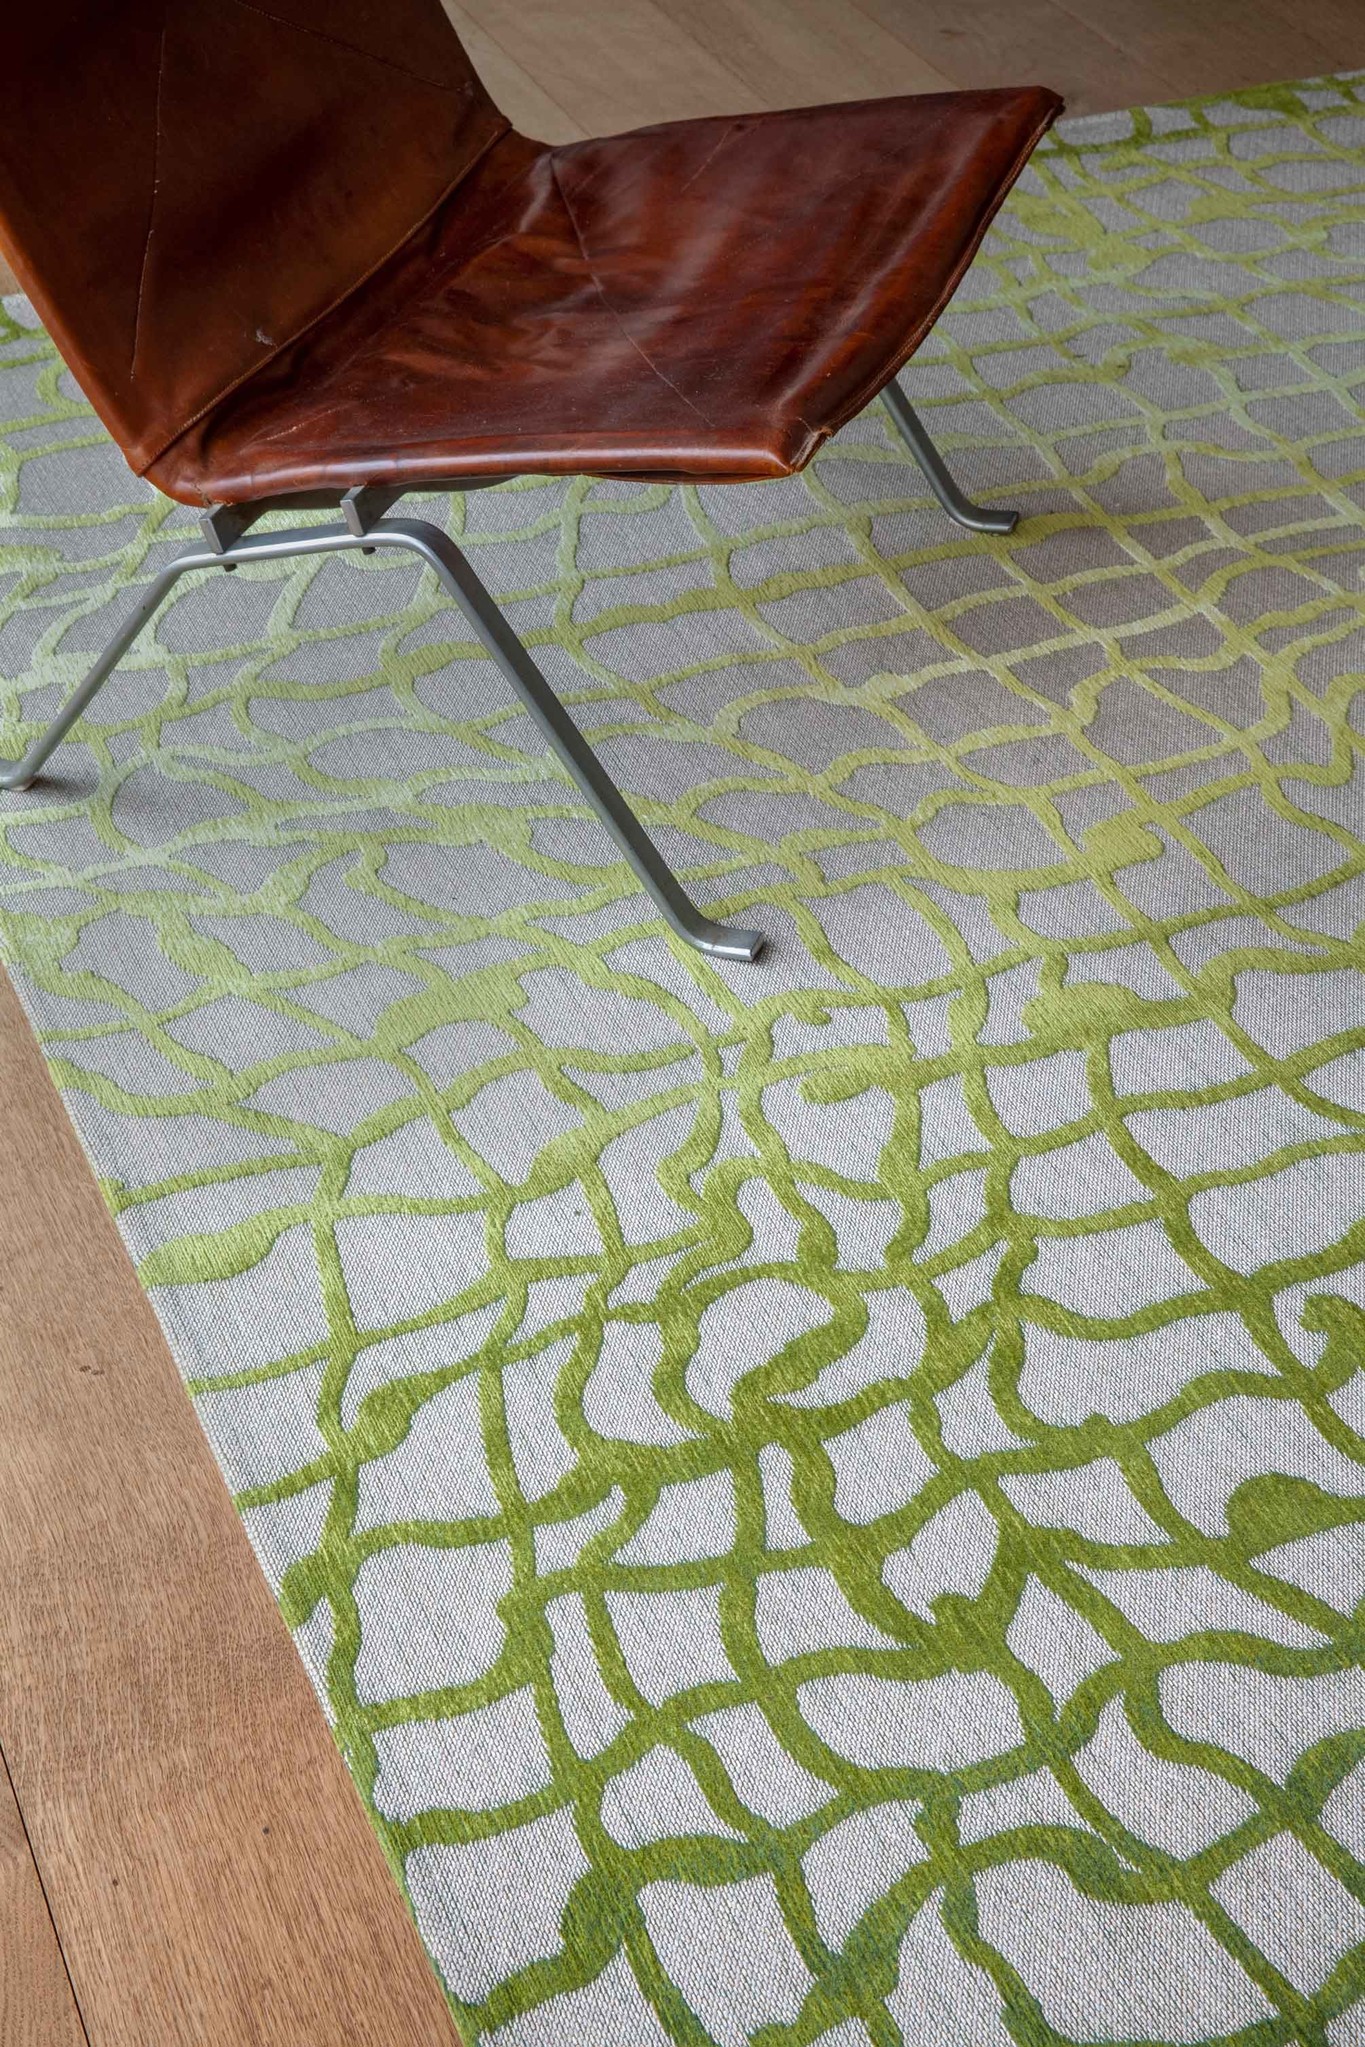 Green Flatwoven Rug ☞ Size: 9' 2" x 13' (280 x 390 cm)